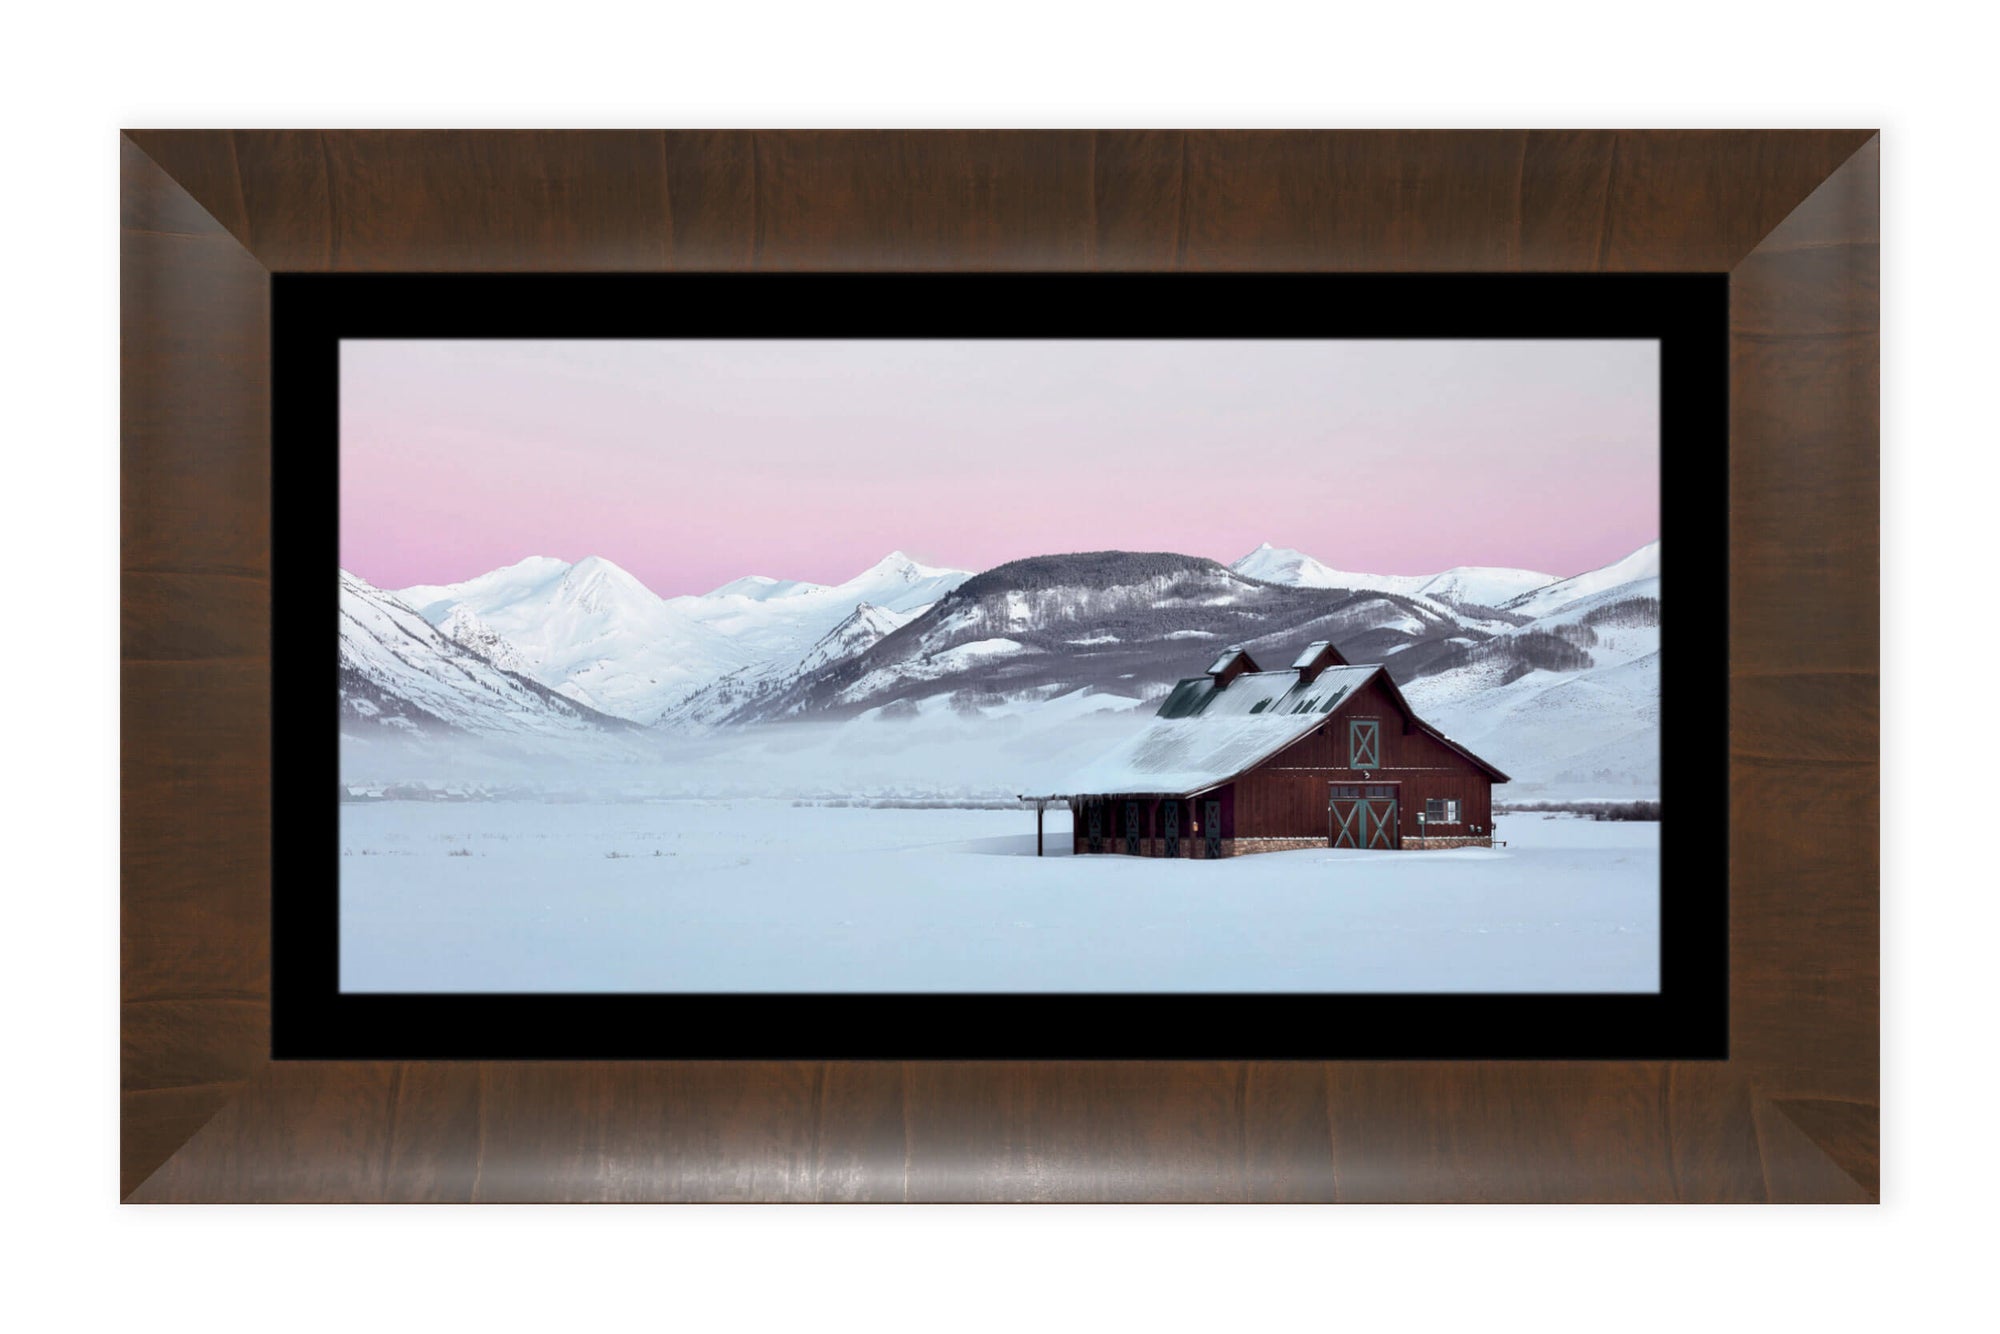 A framed Crested Butte winter picture created at sunrise.